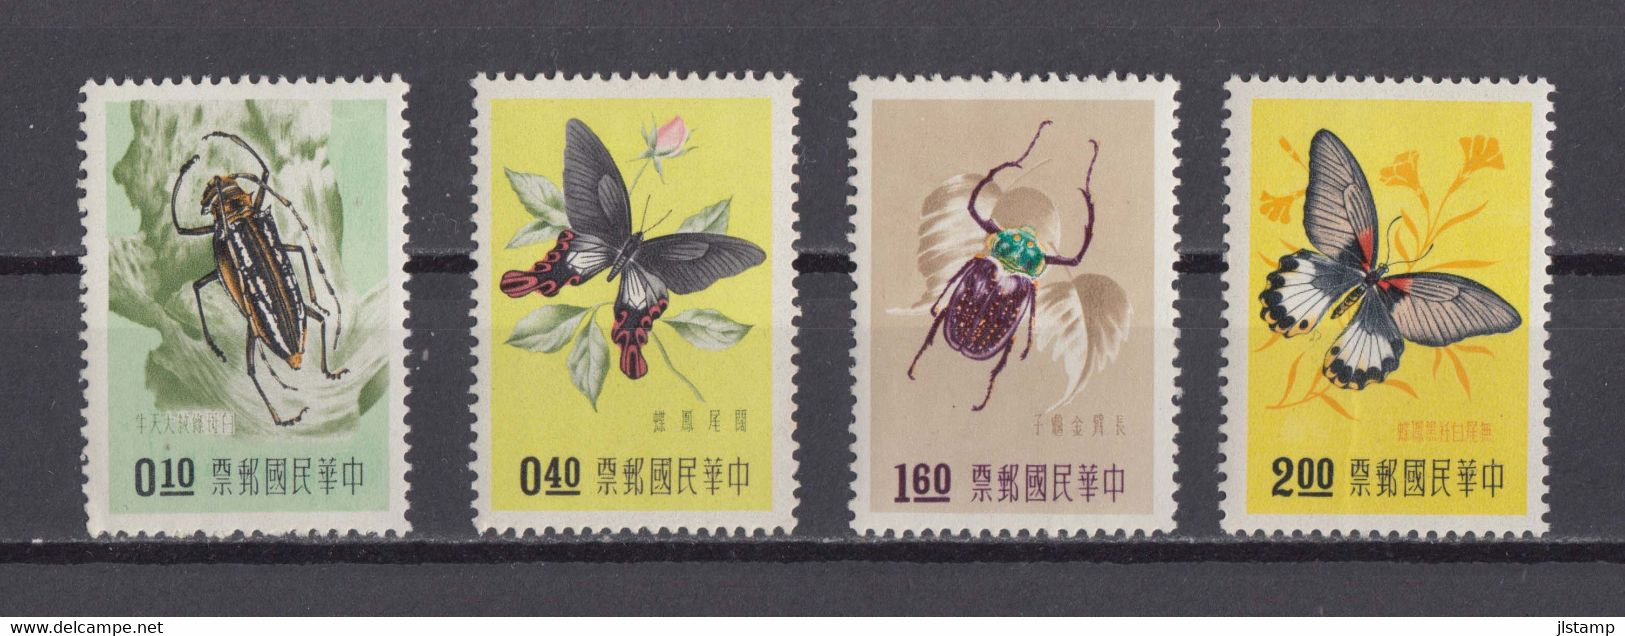 China Taiwan 1958 Insect And Butterfly Stamps 4v,Scott# 1183-1188,OG,MNH,VF - Unused Stamps